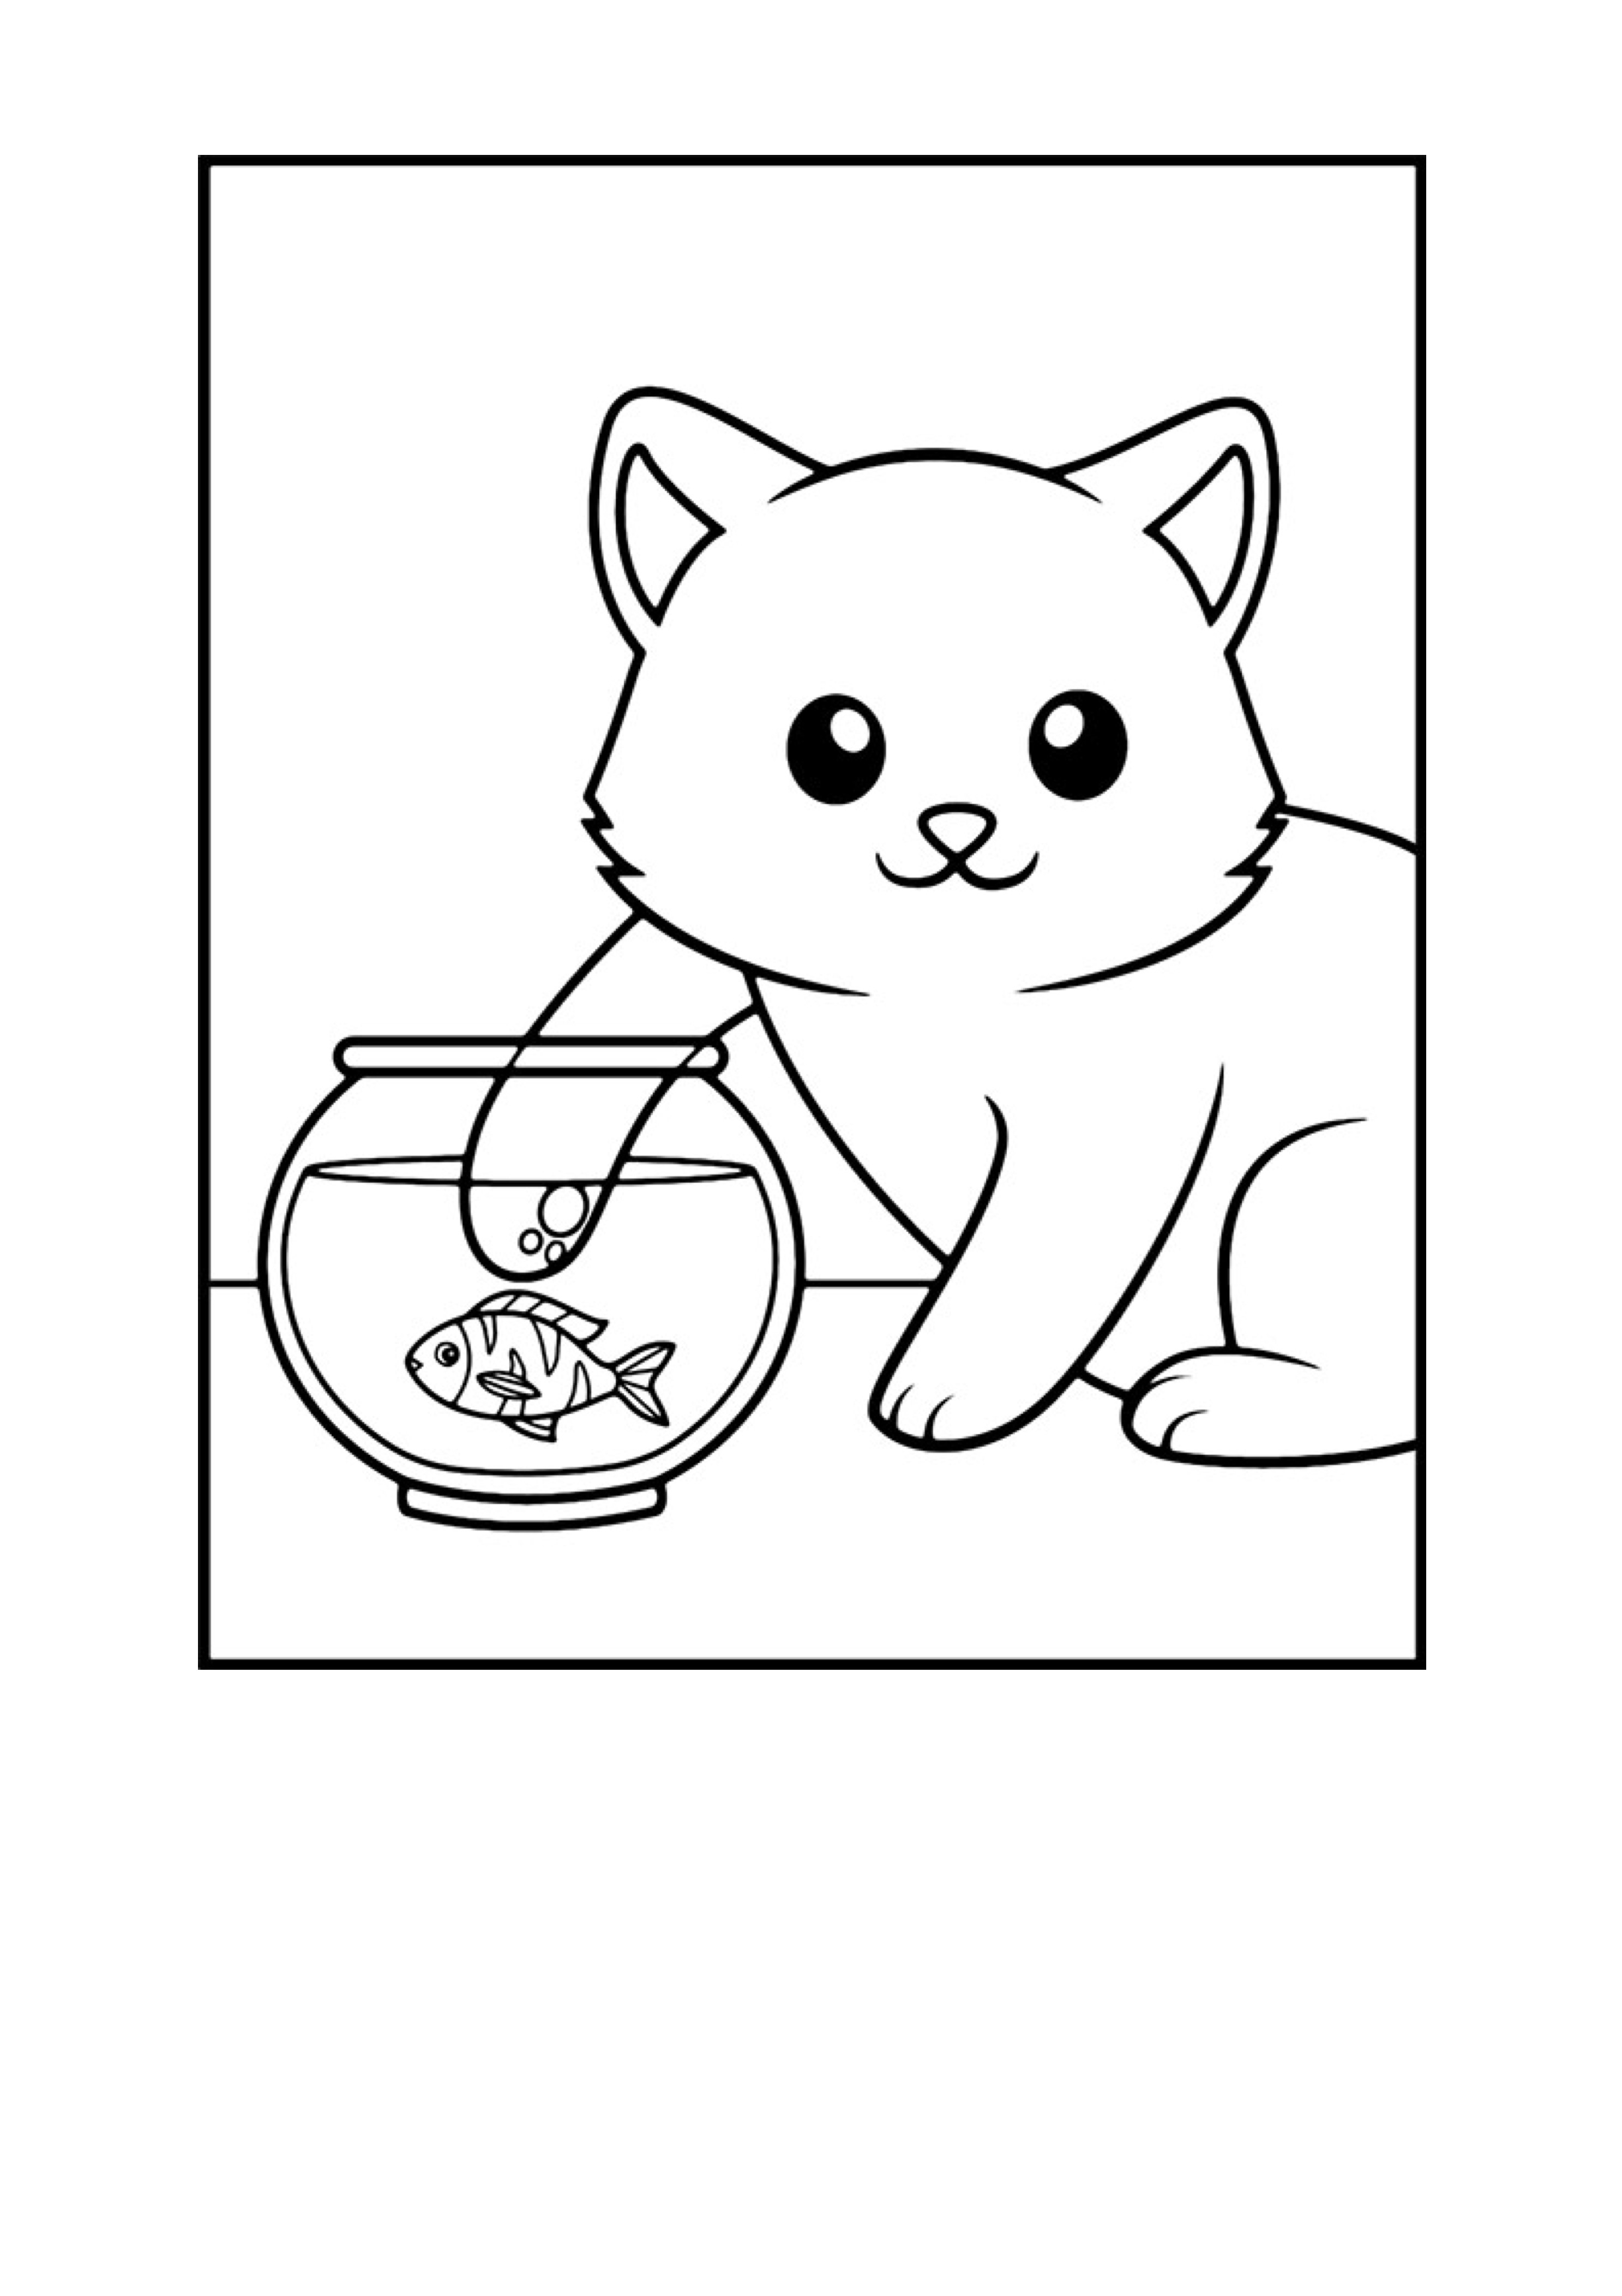 Coloring page cat & gold fish.jpg